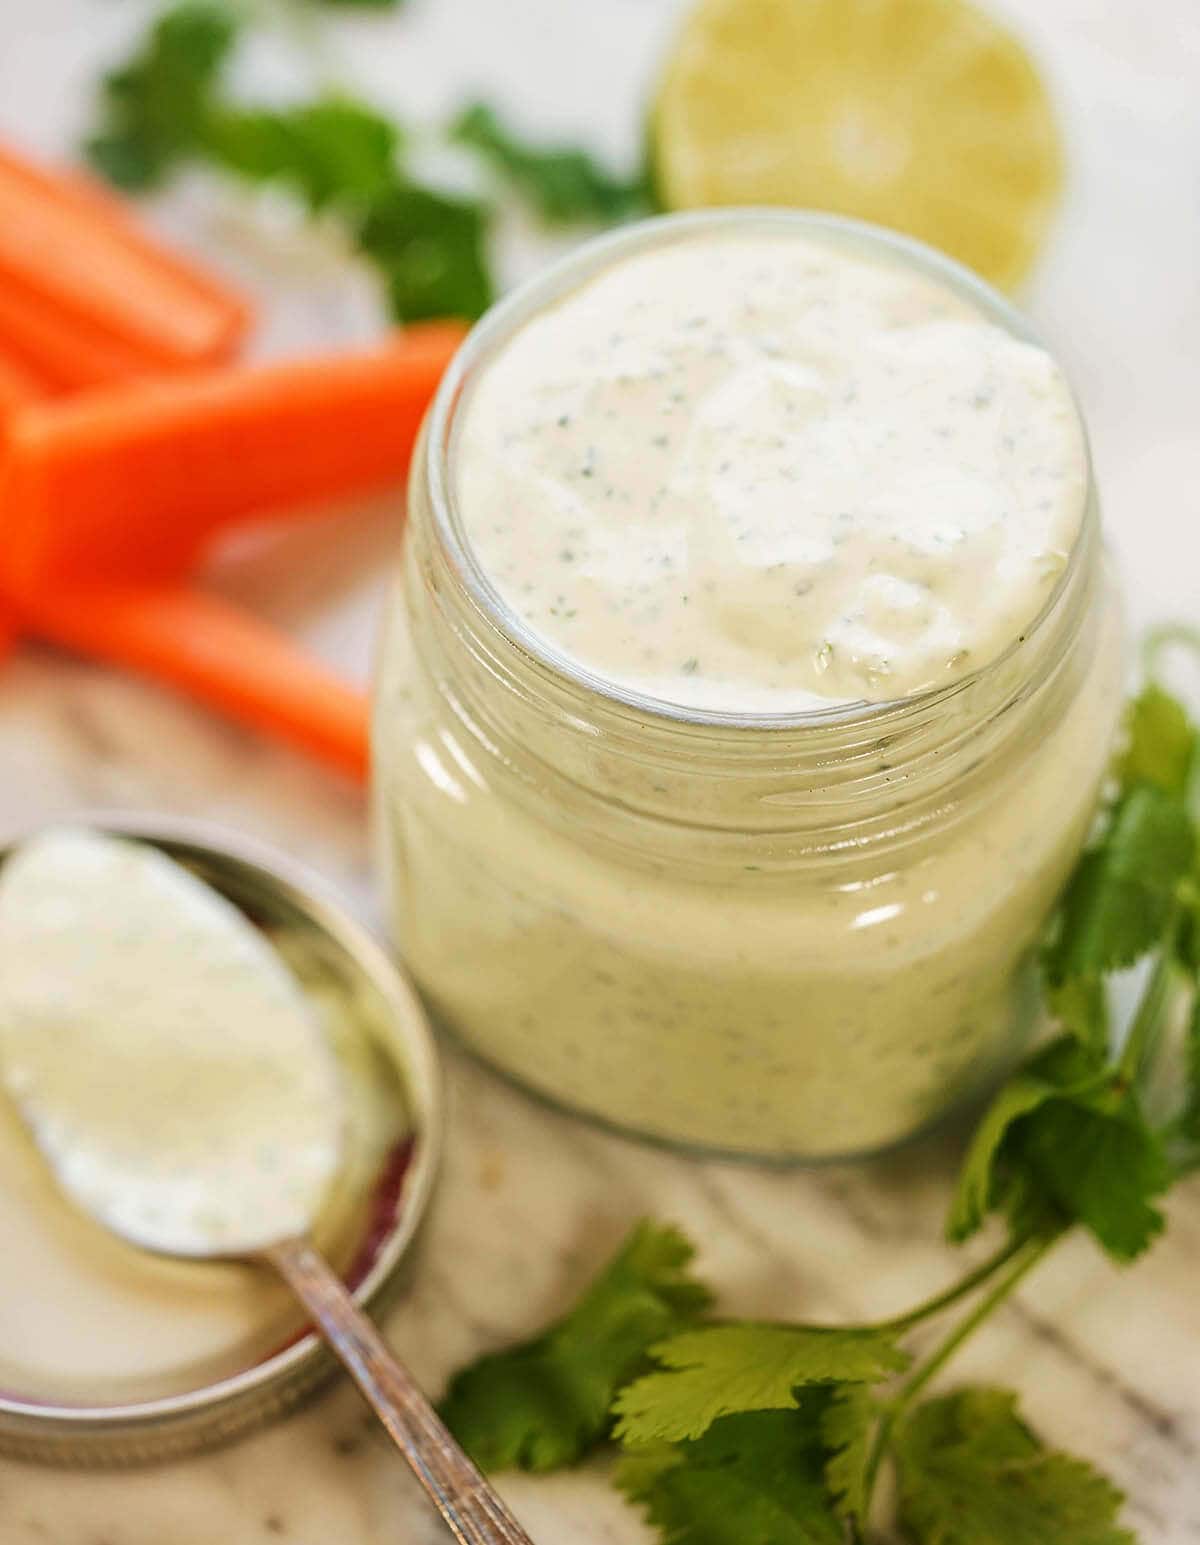 Dip in a glass jar with spoon and carrots for dunking.